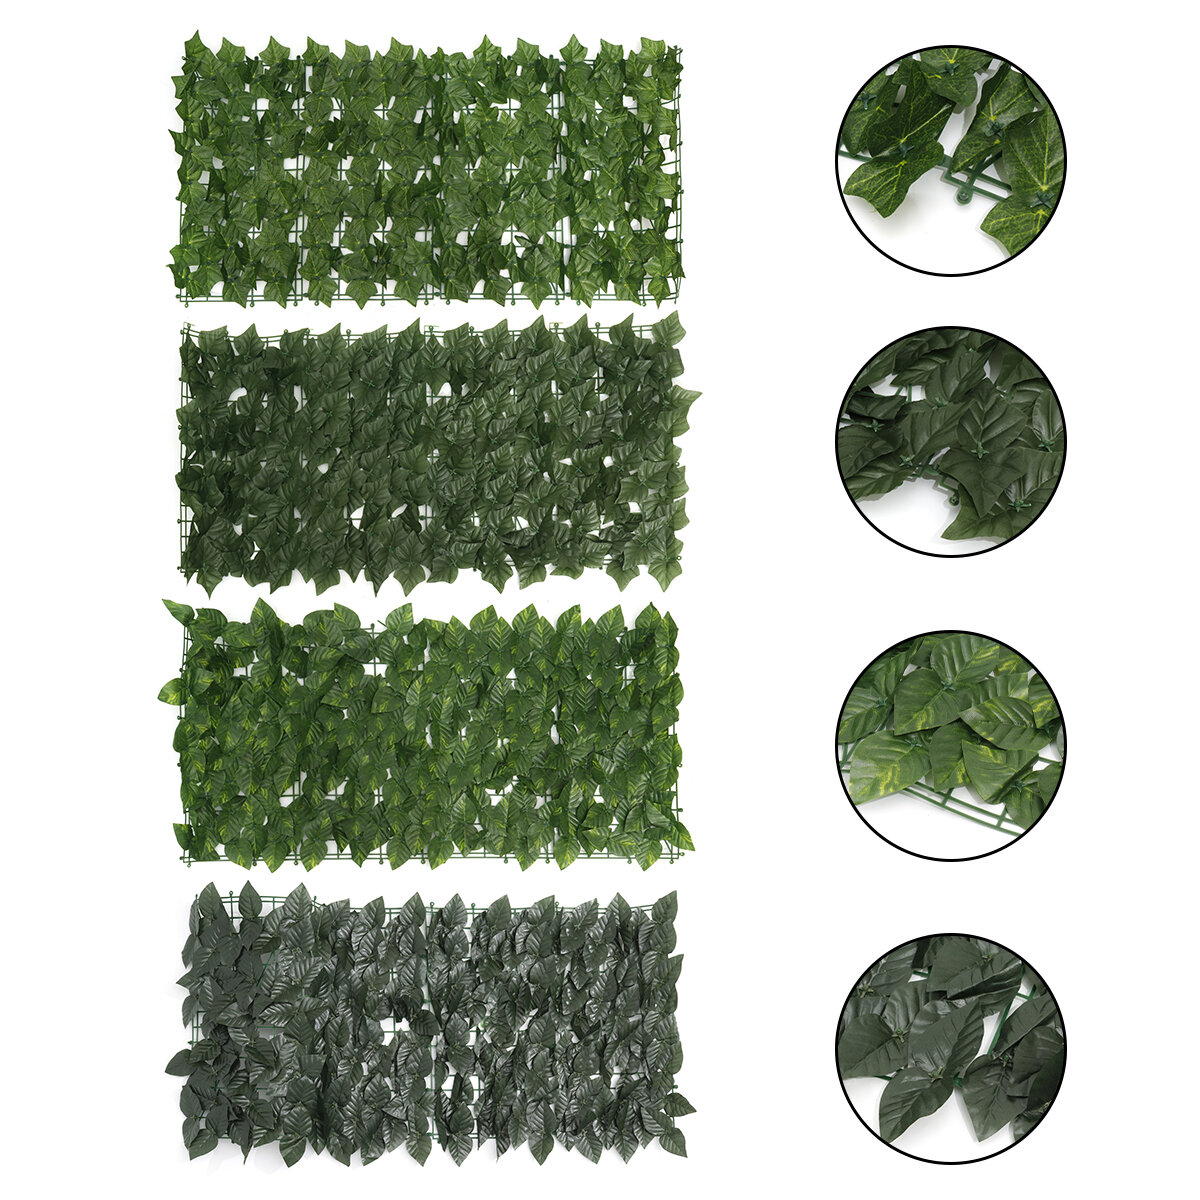 05M Outdoor Artificial Faux Ivy Leaf Privacy Fence Screen Decor Panels Hedge Garden Wall Cover